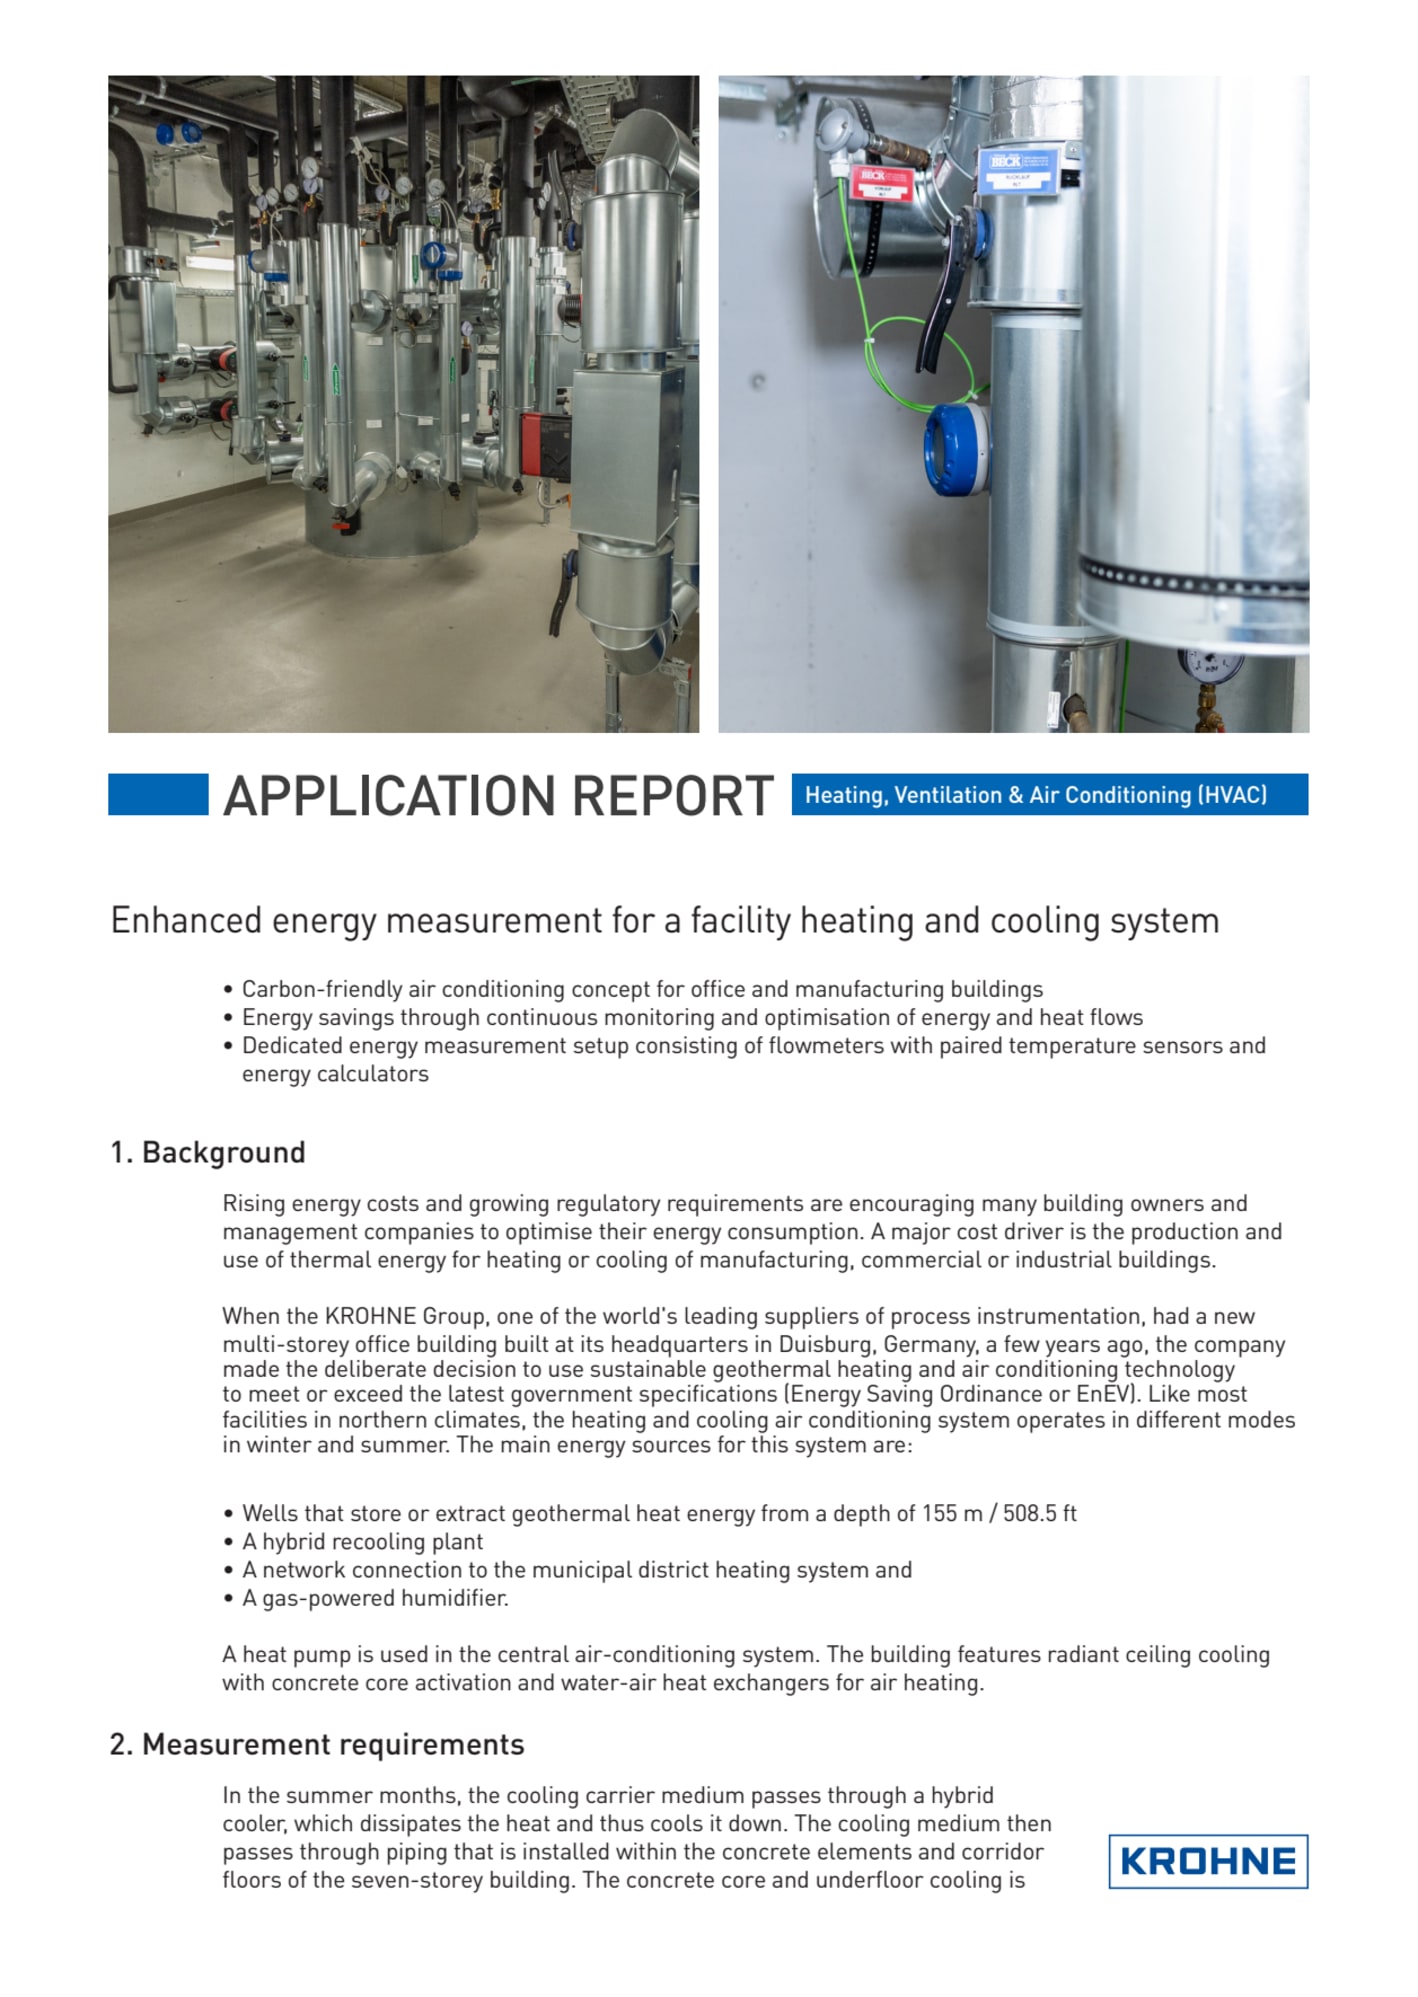 Enhanced energy measurement for a facility heating and cooling system  Krohne Applications